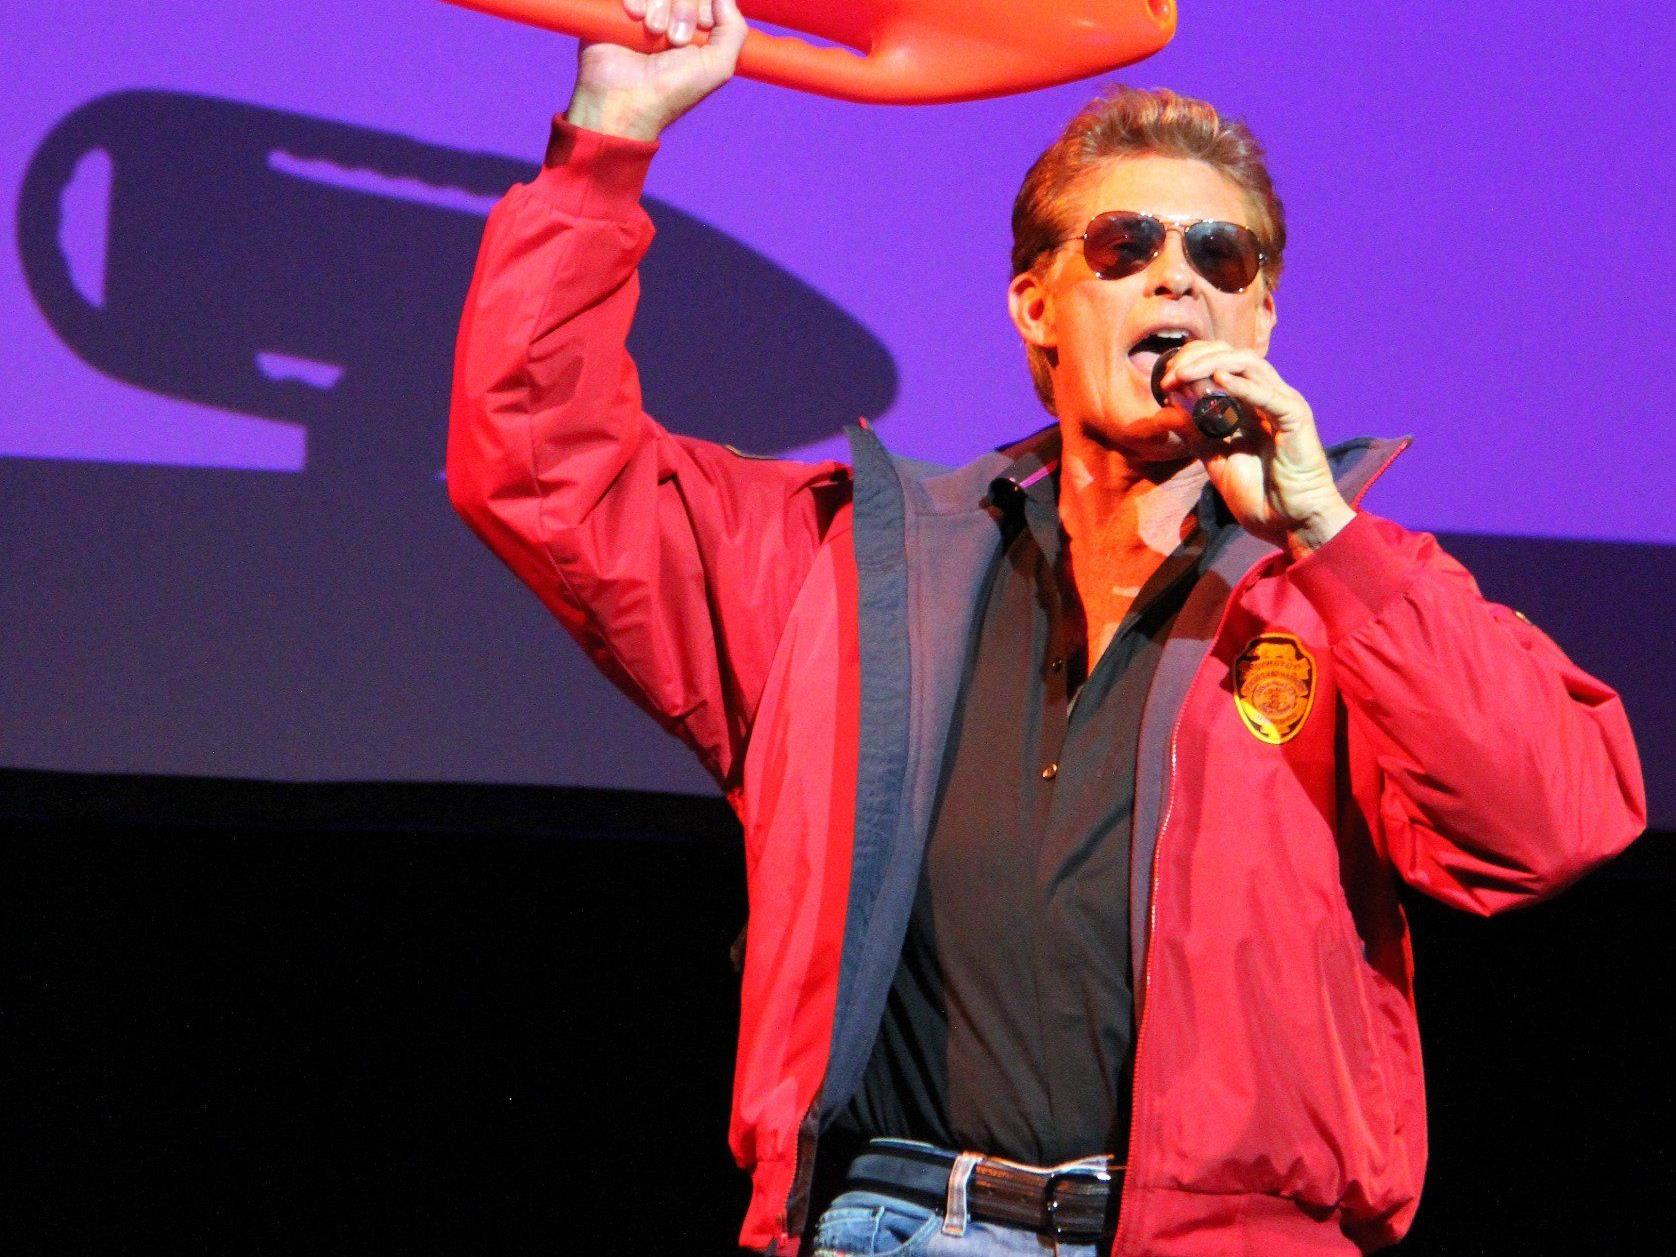 David "The Hoff" Hasselhoff in Action.